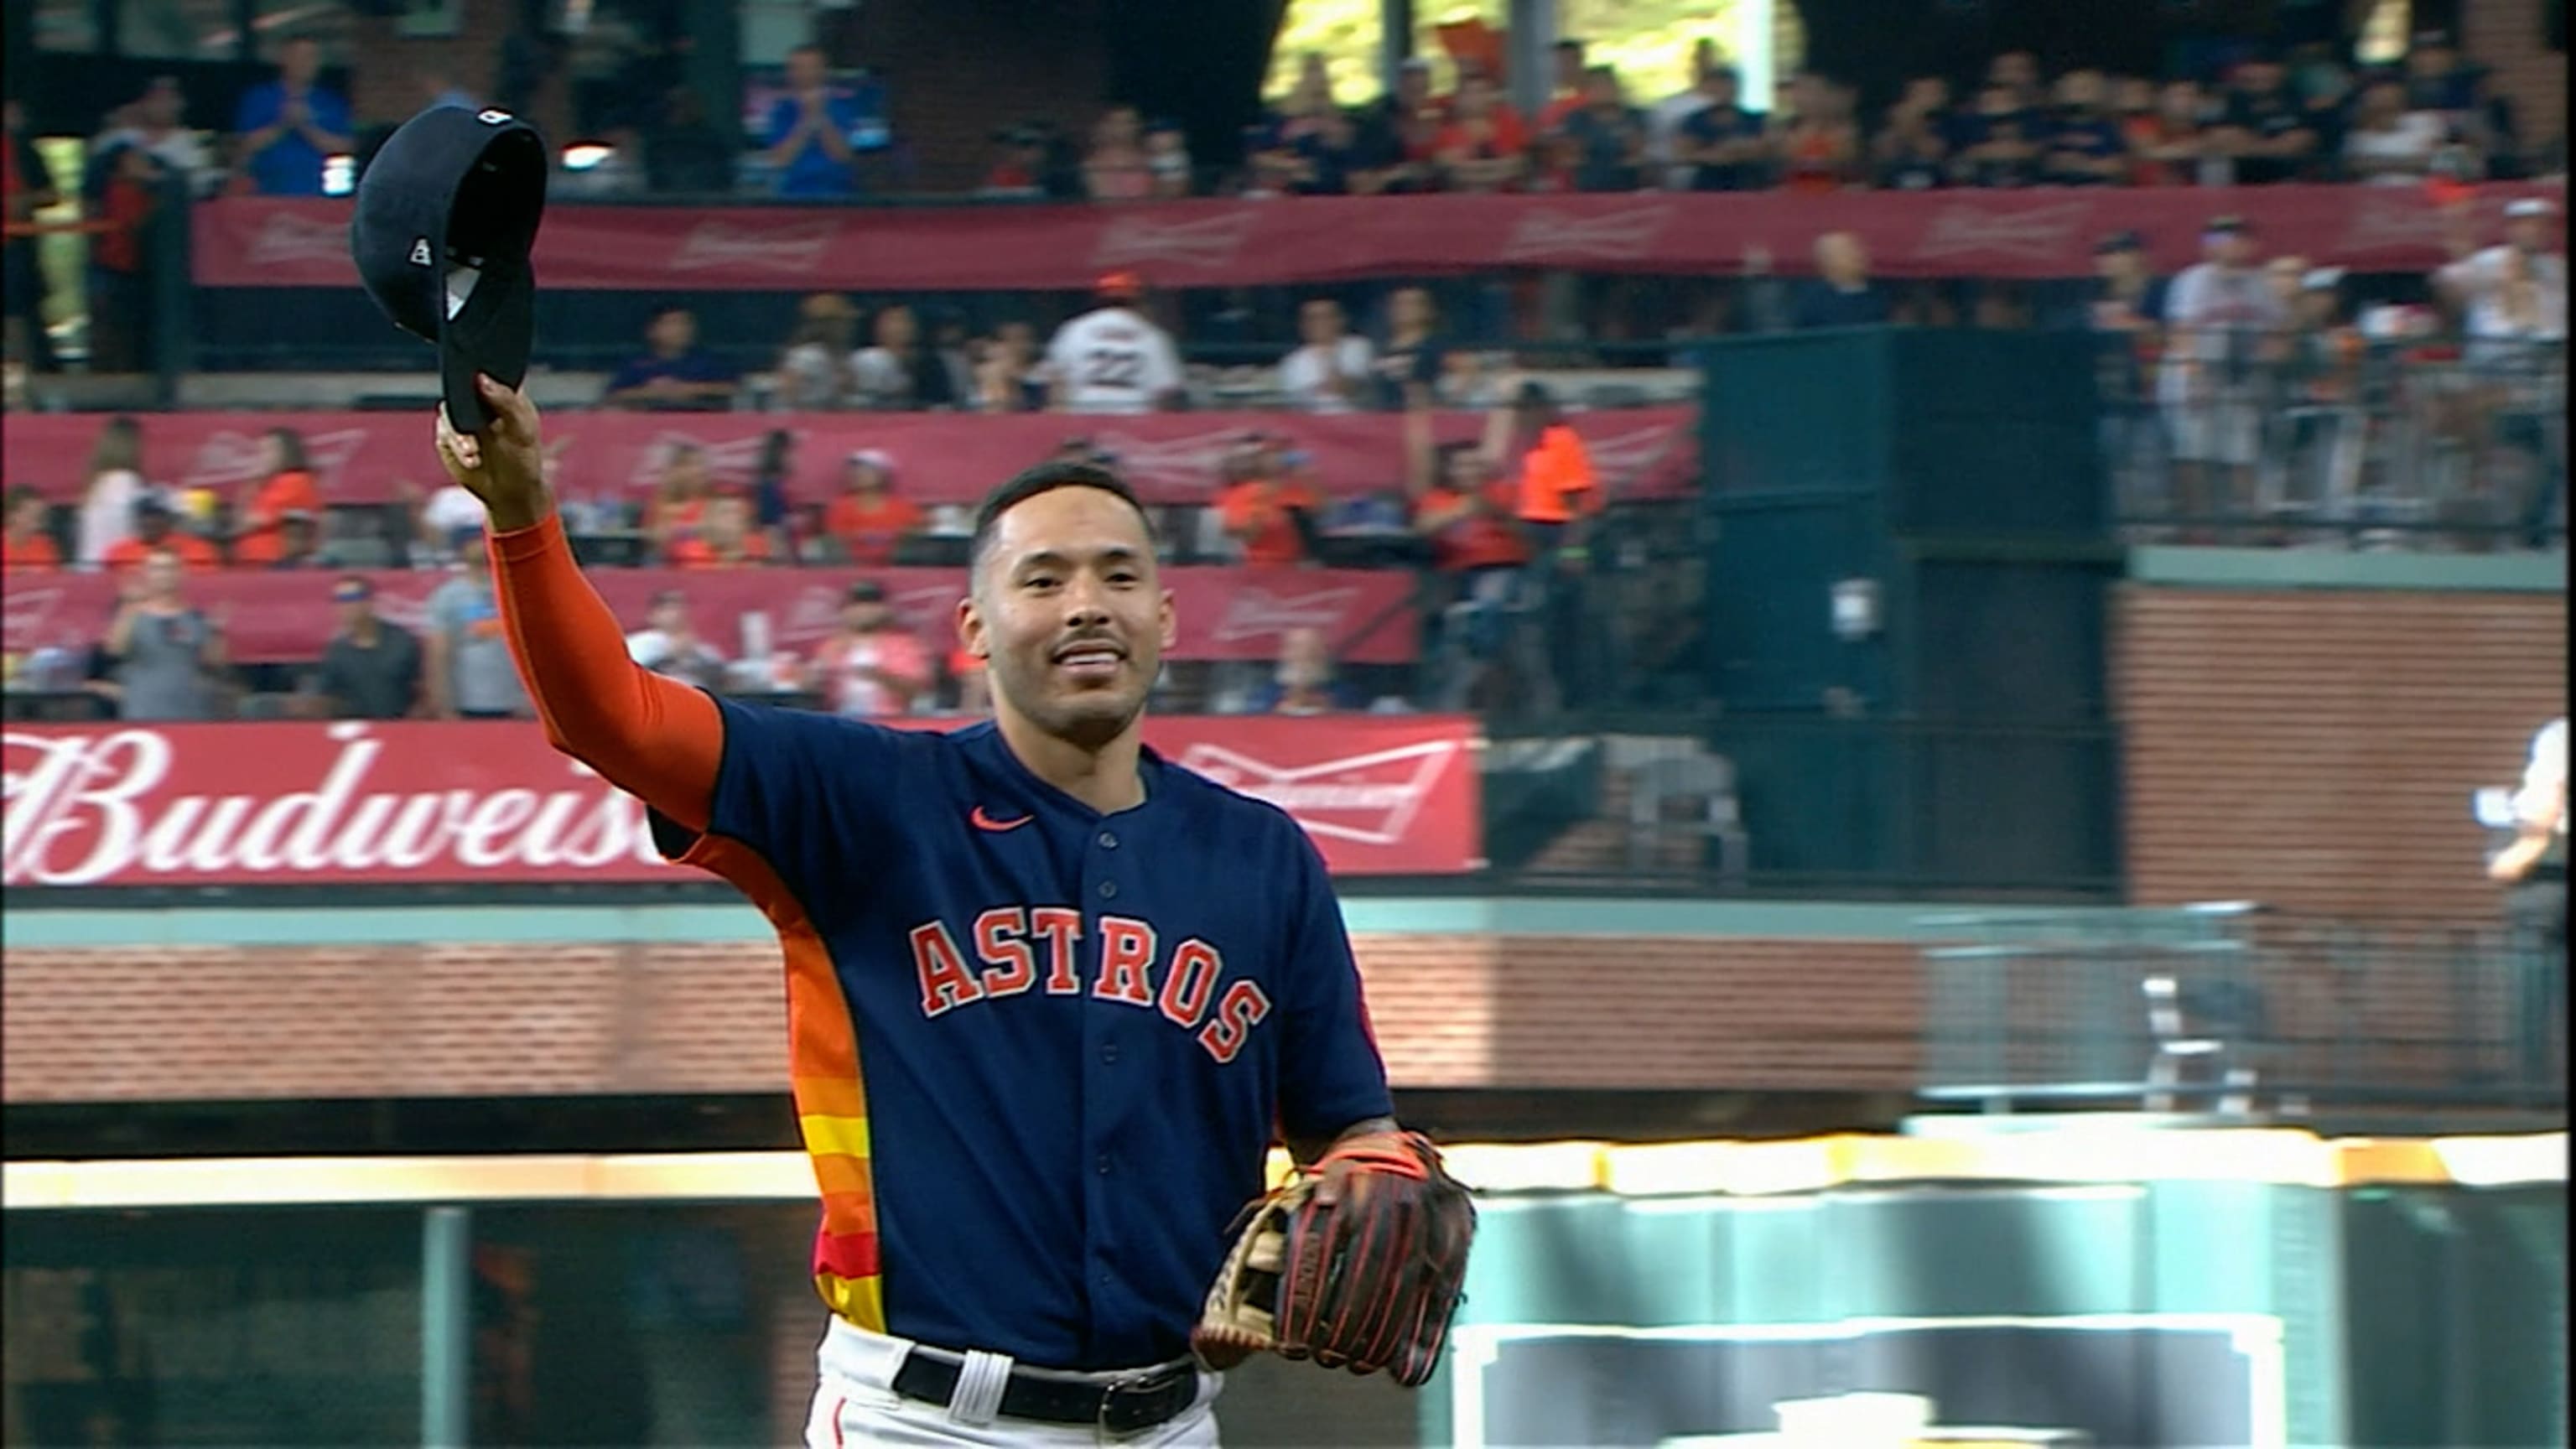 When Carlos Correa clapped back in style after Houston Astros